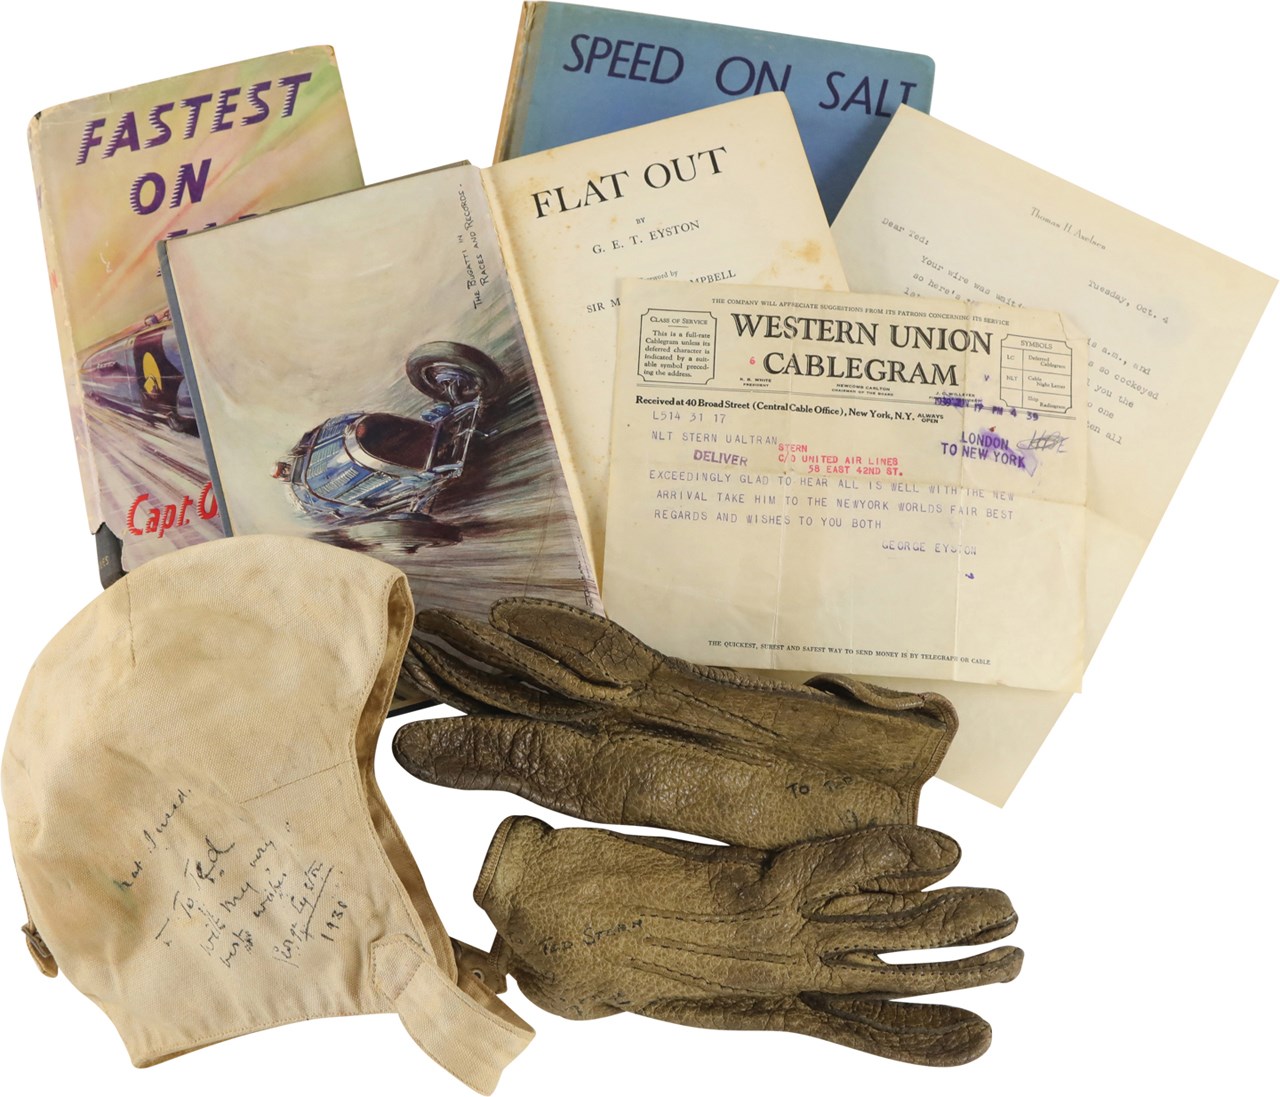 George Eyston Race Worn Gloves and Canvas Helmet Signed to His Public Relations Rep - Land Speed Record Pioneer